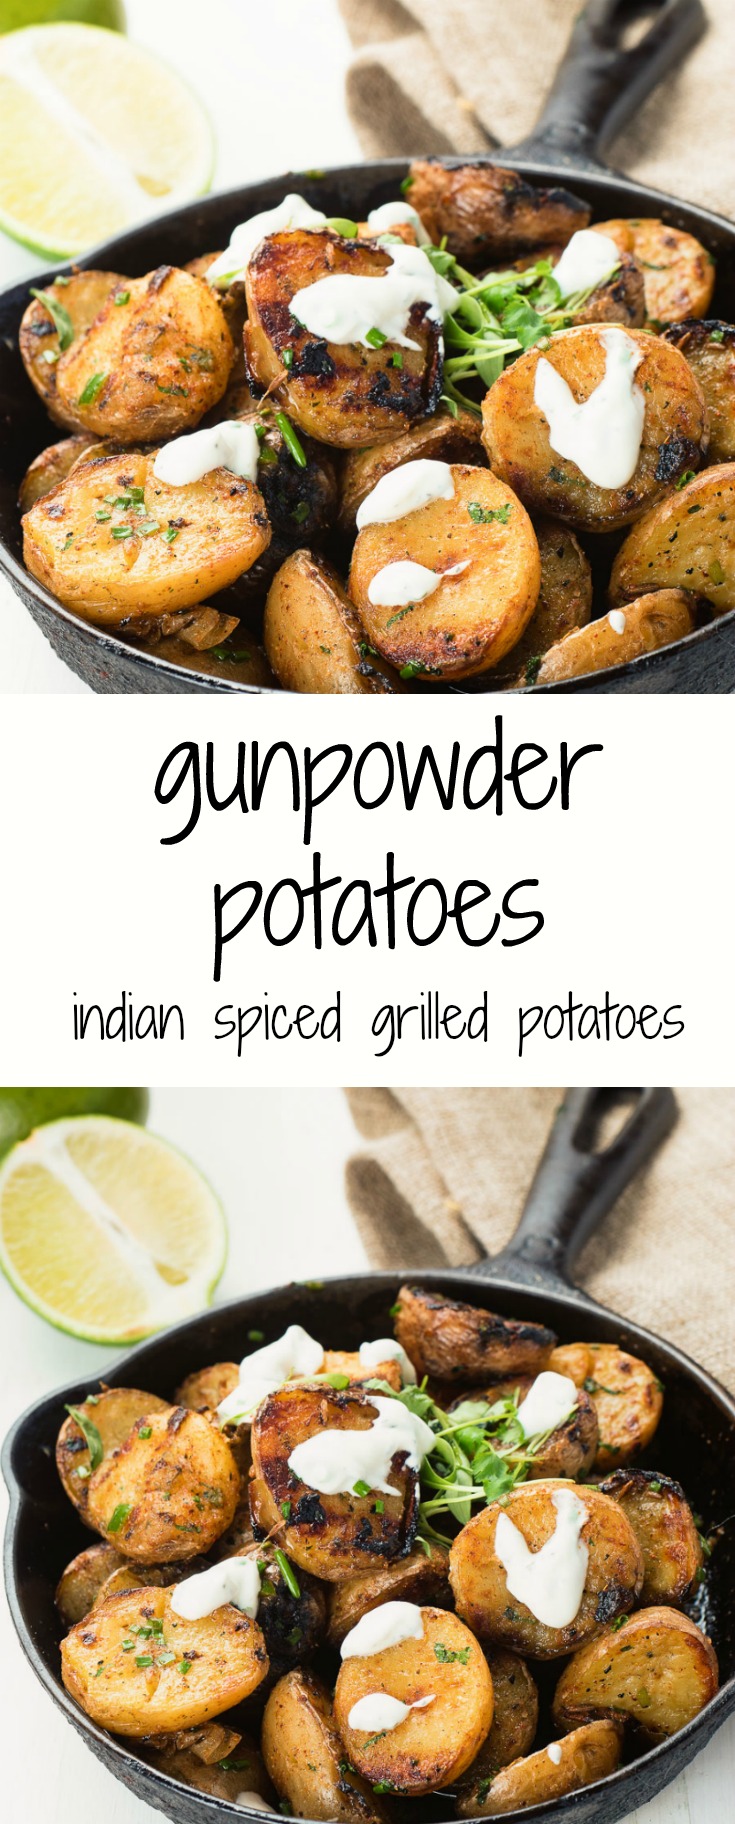 Gunpowder potatoes are India's super tasty, spicy answer to chili cheese fries.